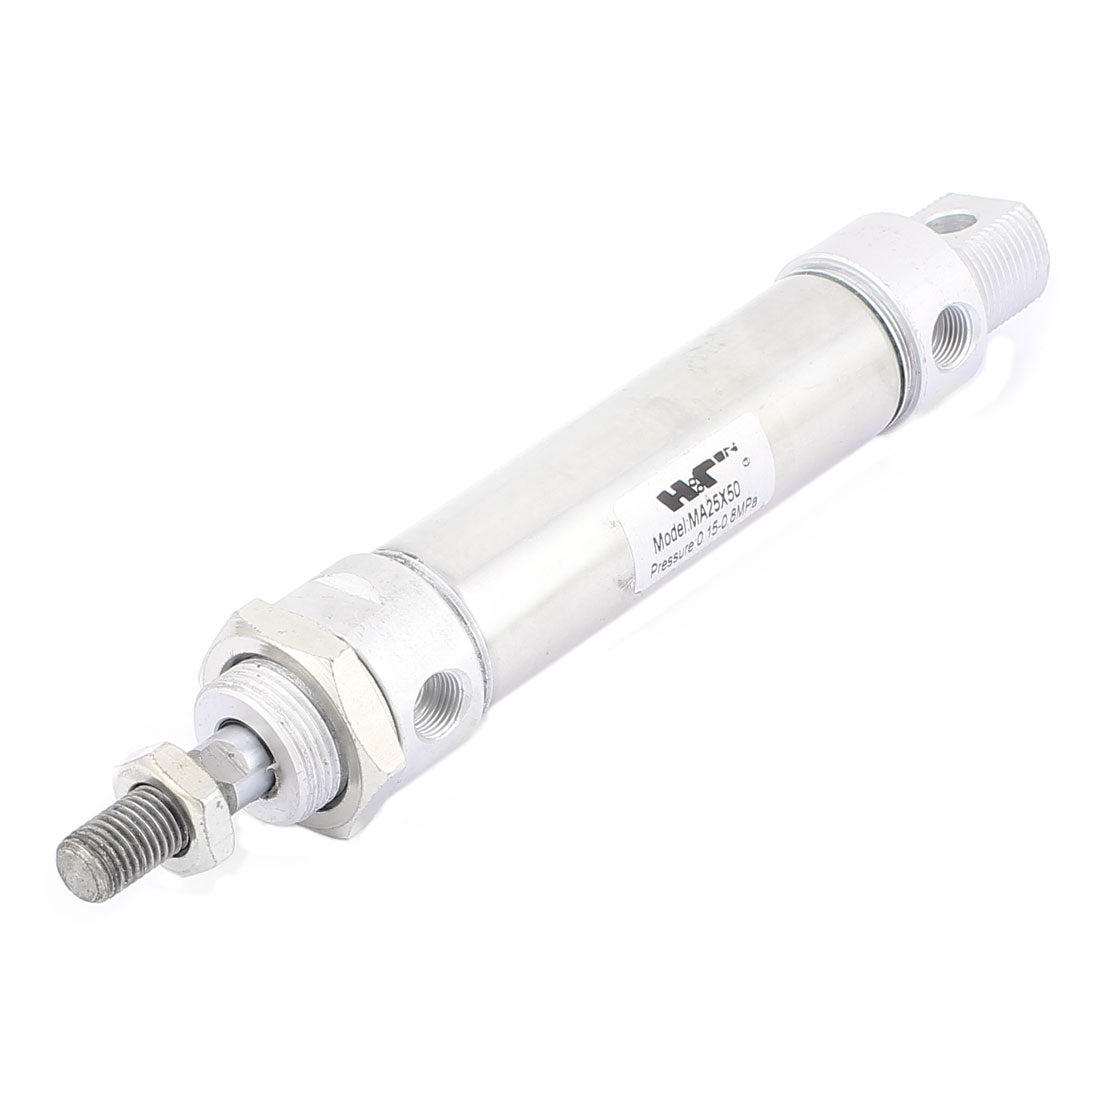 uxcell Uxcell MA25*50 25mm Bore 50mm Stroke Screwed Piston Rod Mini Pneumatic Air Cylinder